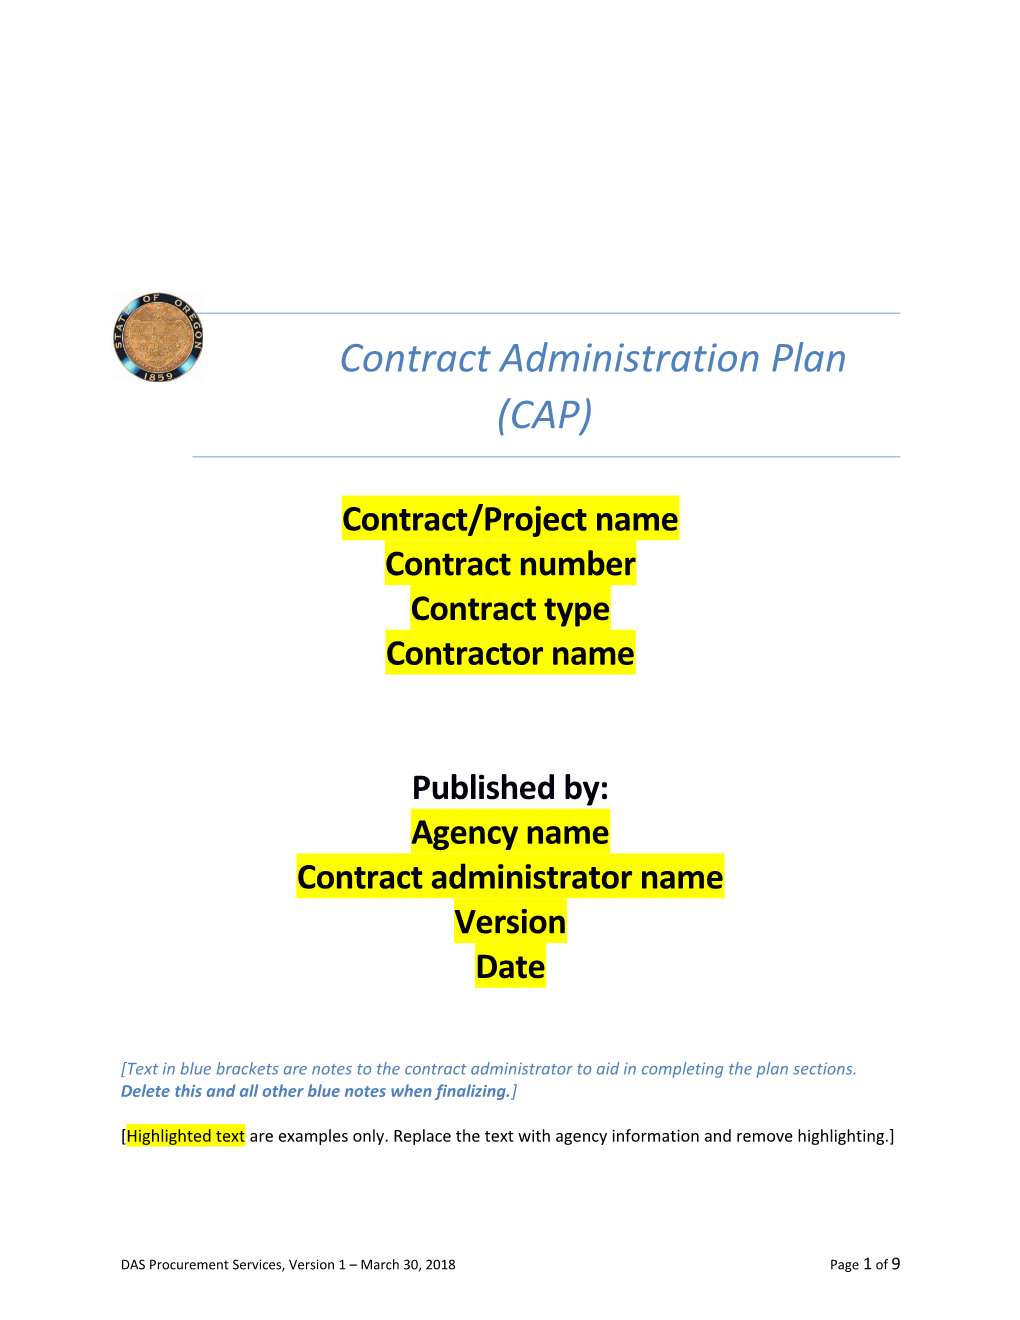 Contract Administration Plan (CAP)